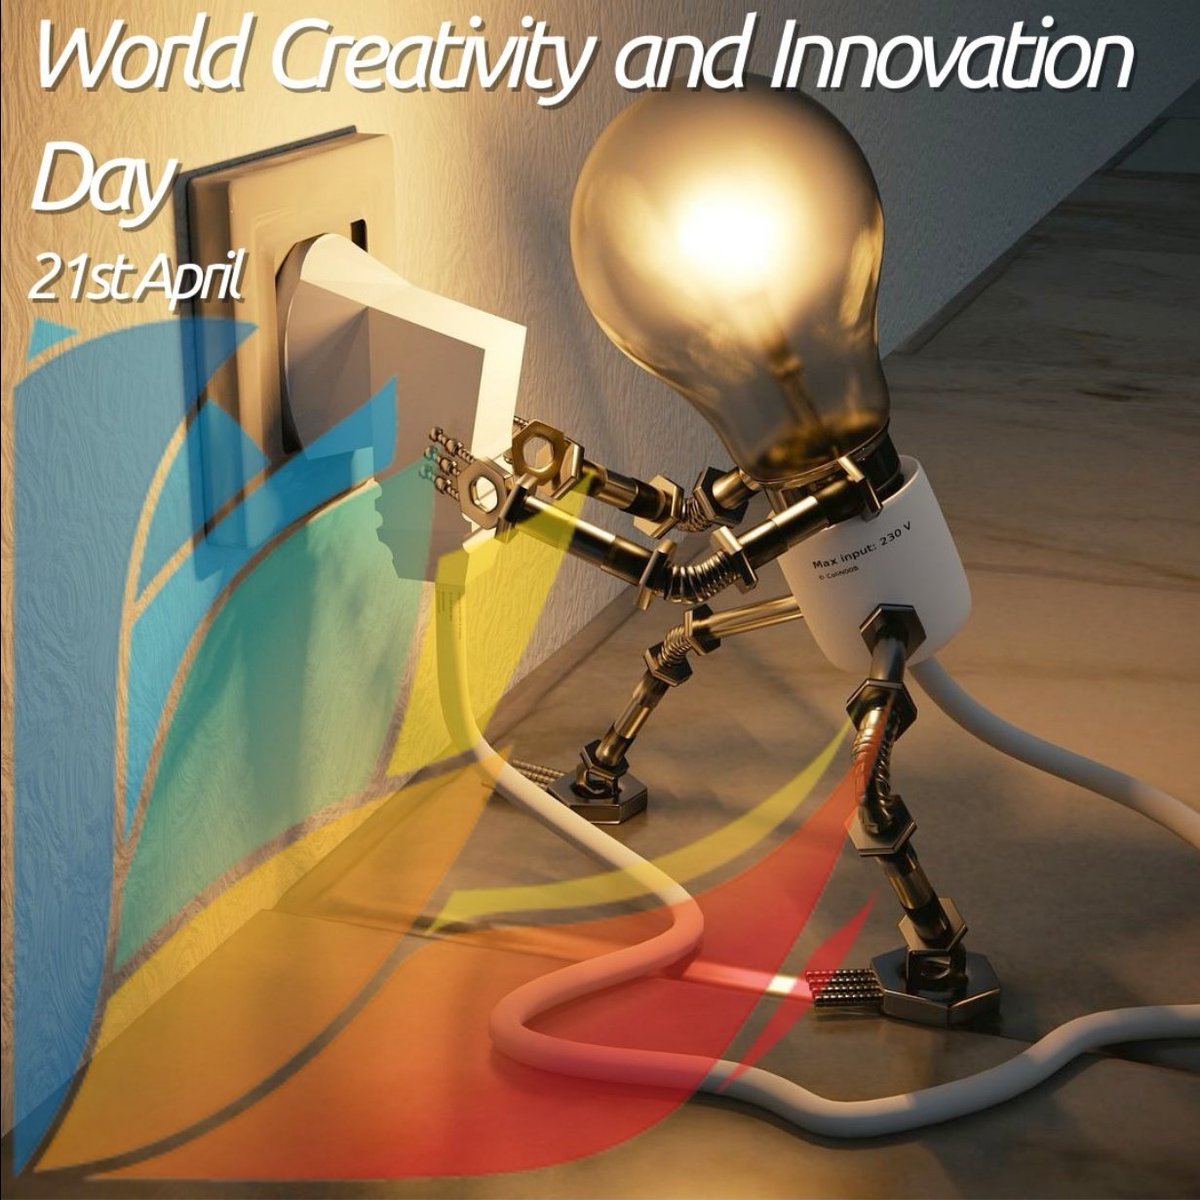 Today is to bring attention to the significance of creativity and innovation in every facet of human progress.⁠ There may be no universal understanding of creativity. #WorldCreativityDay #EducationForAll